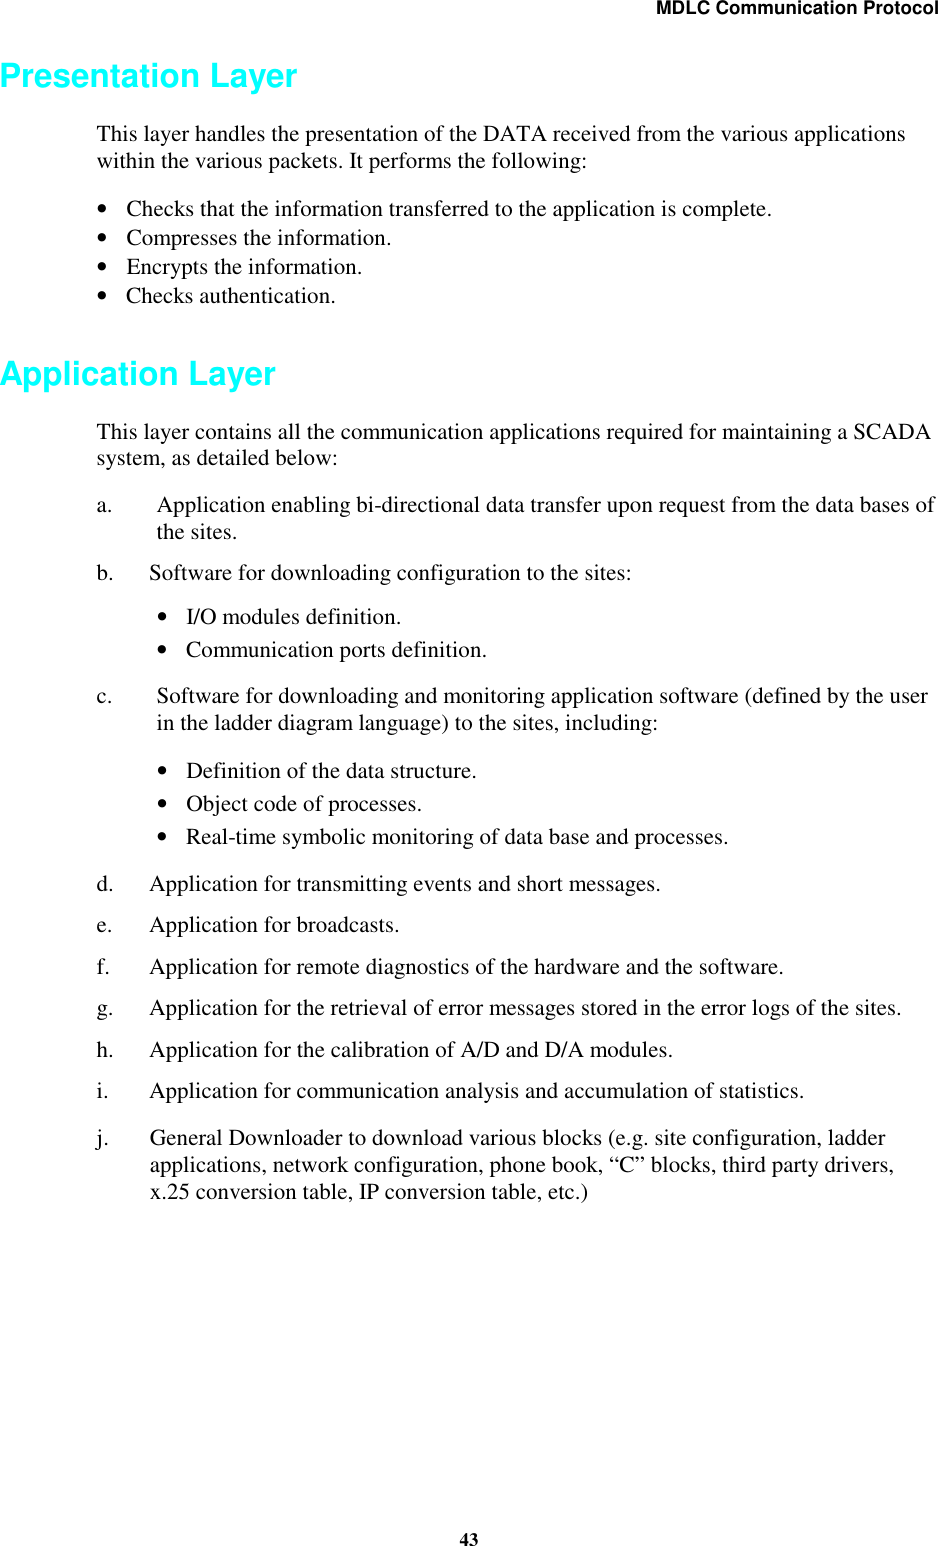 MDLC Communication Protocol43Presentation LayerThis layer handles the presentation of the DATA received from the various applicationswithin the various packets. It performs the following:•Checks that the information transferred to the application is complete.•Compresses the information.•Encrypts the information.•Checks authentication.Application LayerThis layer contains all the communication applications required for maintaining a SCADAsystem, as detailed below:a. Application enabling bi-directional data transfer upon request from the data bases ofthe sites.b. Software for downloading configuration to the sites:•I/O modules definition.•Communication ports definition.c. Software for downloading and monitoring application software (defined by the userin the ladder diagram language) to the sites, including:•Definition of the data structure.•Object code of processes.•Real-time symbolic monitoring of data base and processes.d. Application for transmitting events and short messages.e. Application for broadcasts.f. Application for remote diagnostics of the hardware and the software.g. Application for the retrieval of error messages stored in the error logs of the sites.h. Application for the calibration of A/D and D/A modules.i. Application for communication analysis and accumulation of statistics.j. General Downloader to download various blocks (e.g. site configuration, ladderapplications, network configuration, phone book, “C” blocks, third party drivers,x.25 conversion table, IP conversion table, etc.)